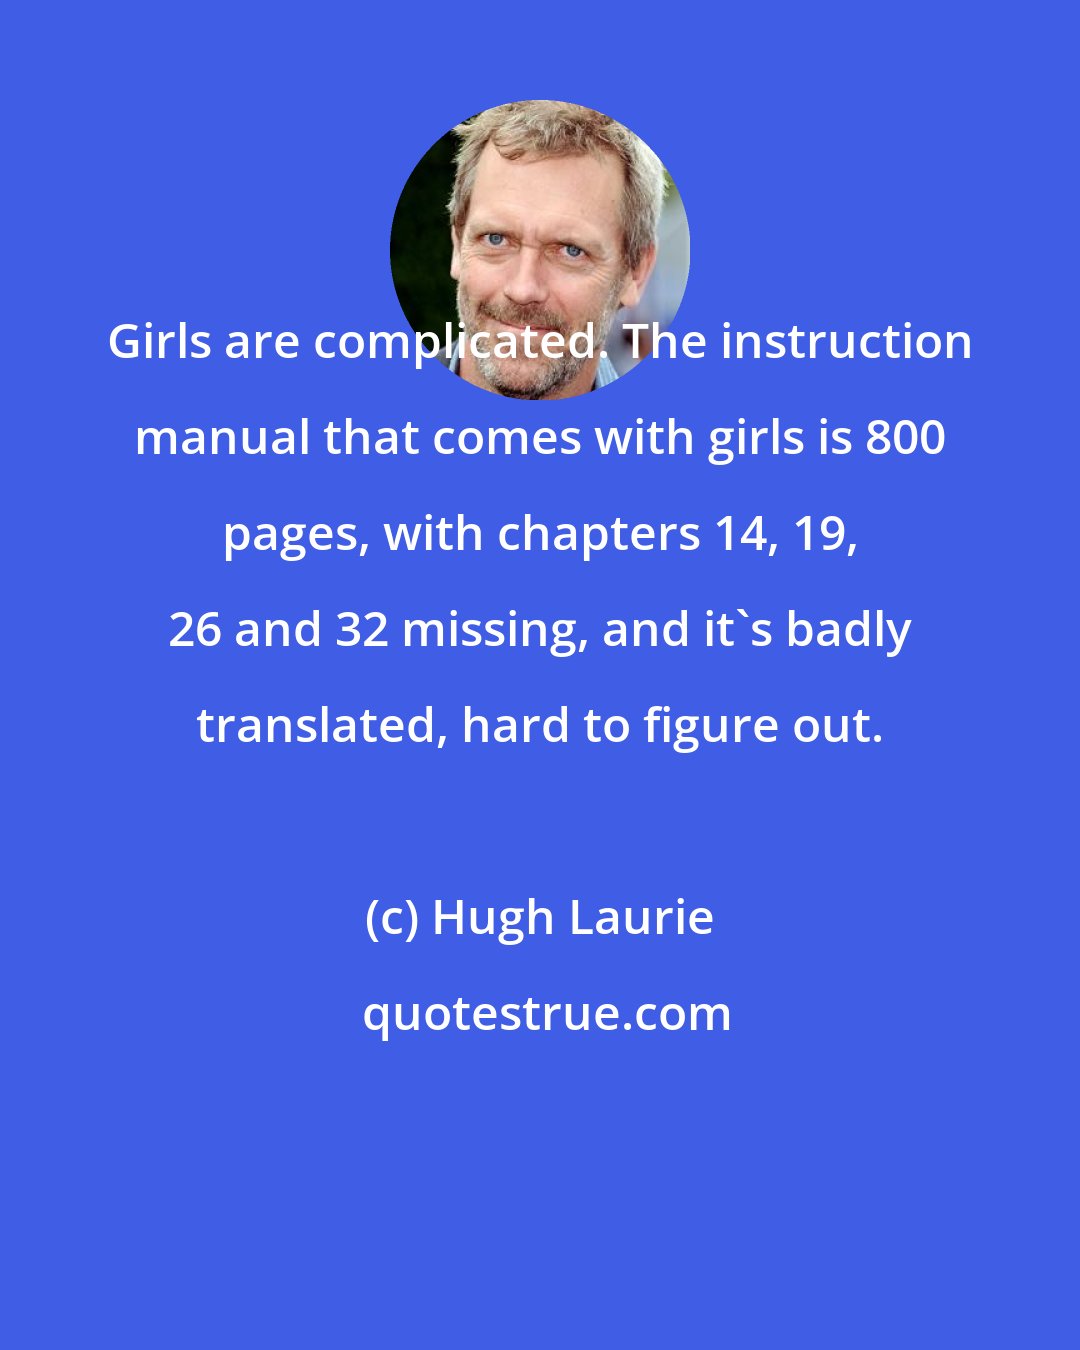 Hugh Laurie: Girls are complicated. The instruction manual that comes with girls is 800 pages, with chapters 14, 19, 26 and 32 missing, and it's badly translated, hard to figure out.